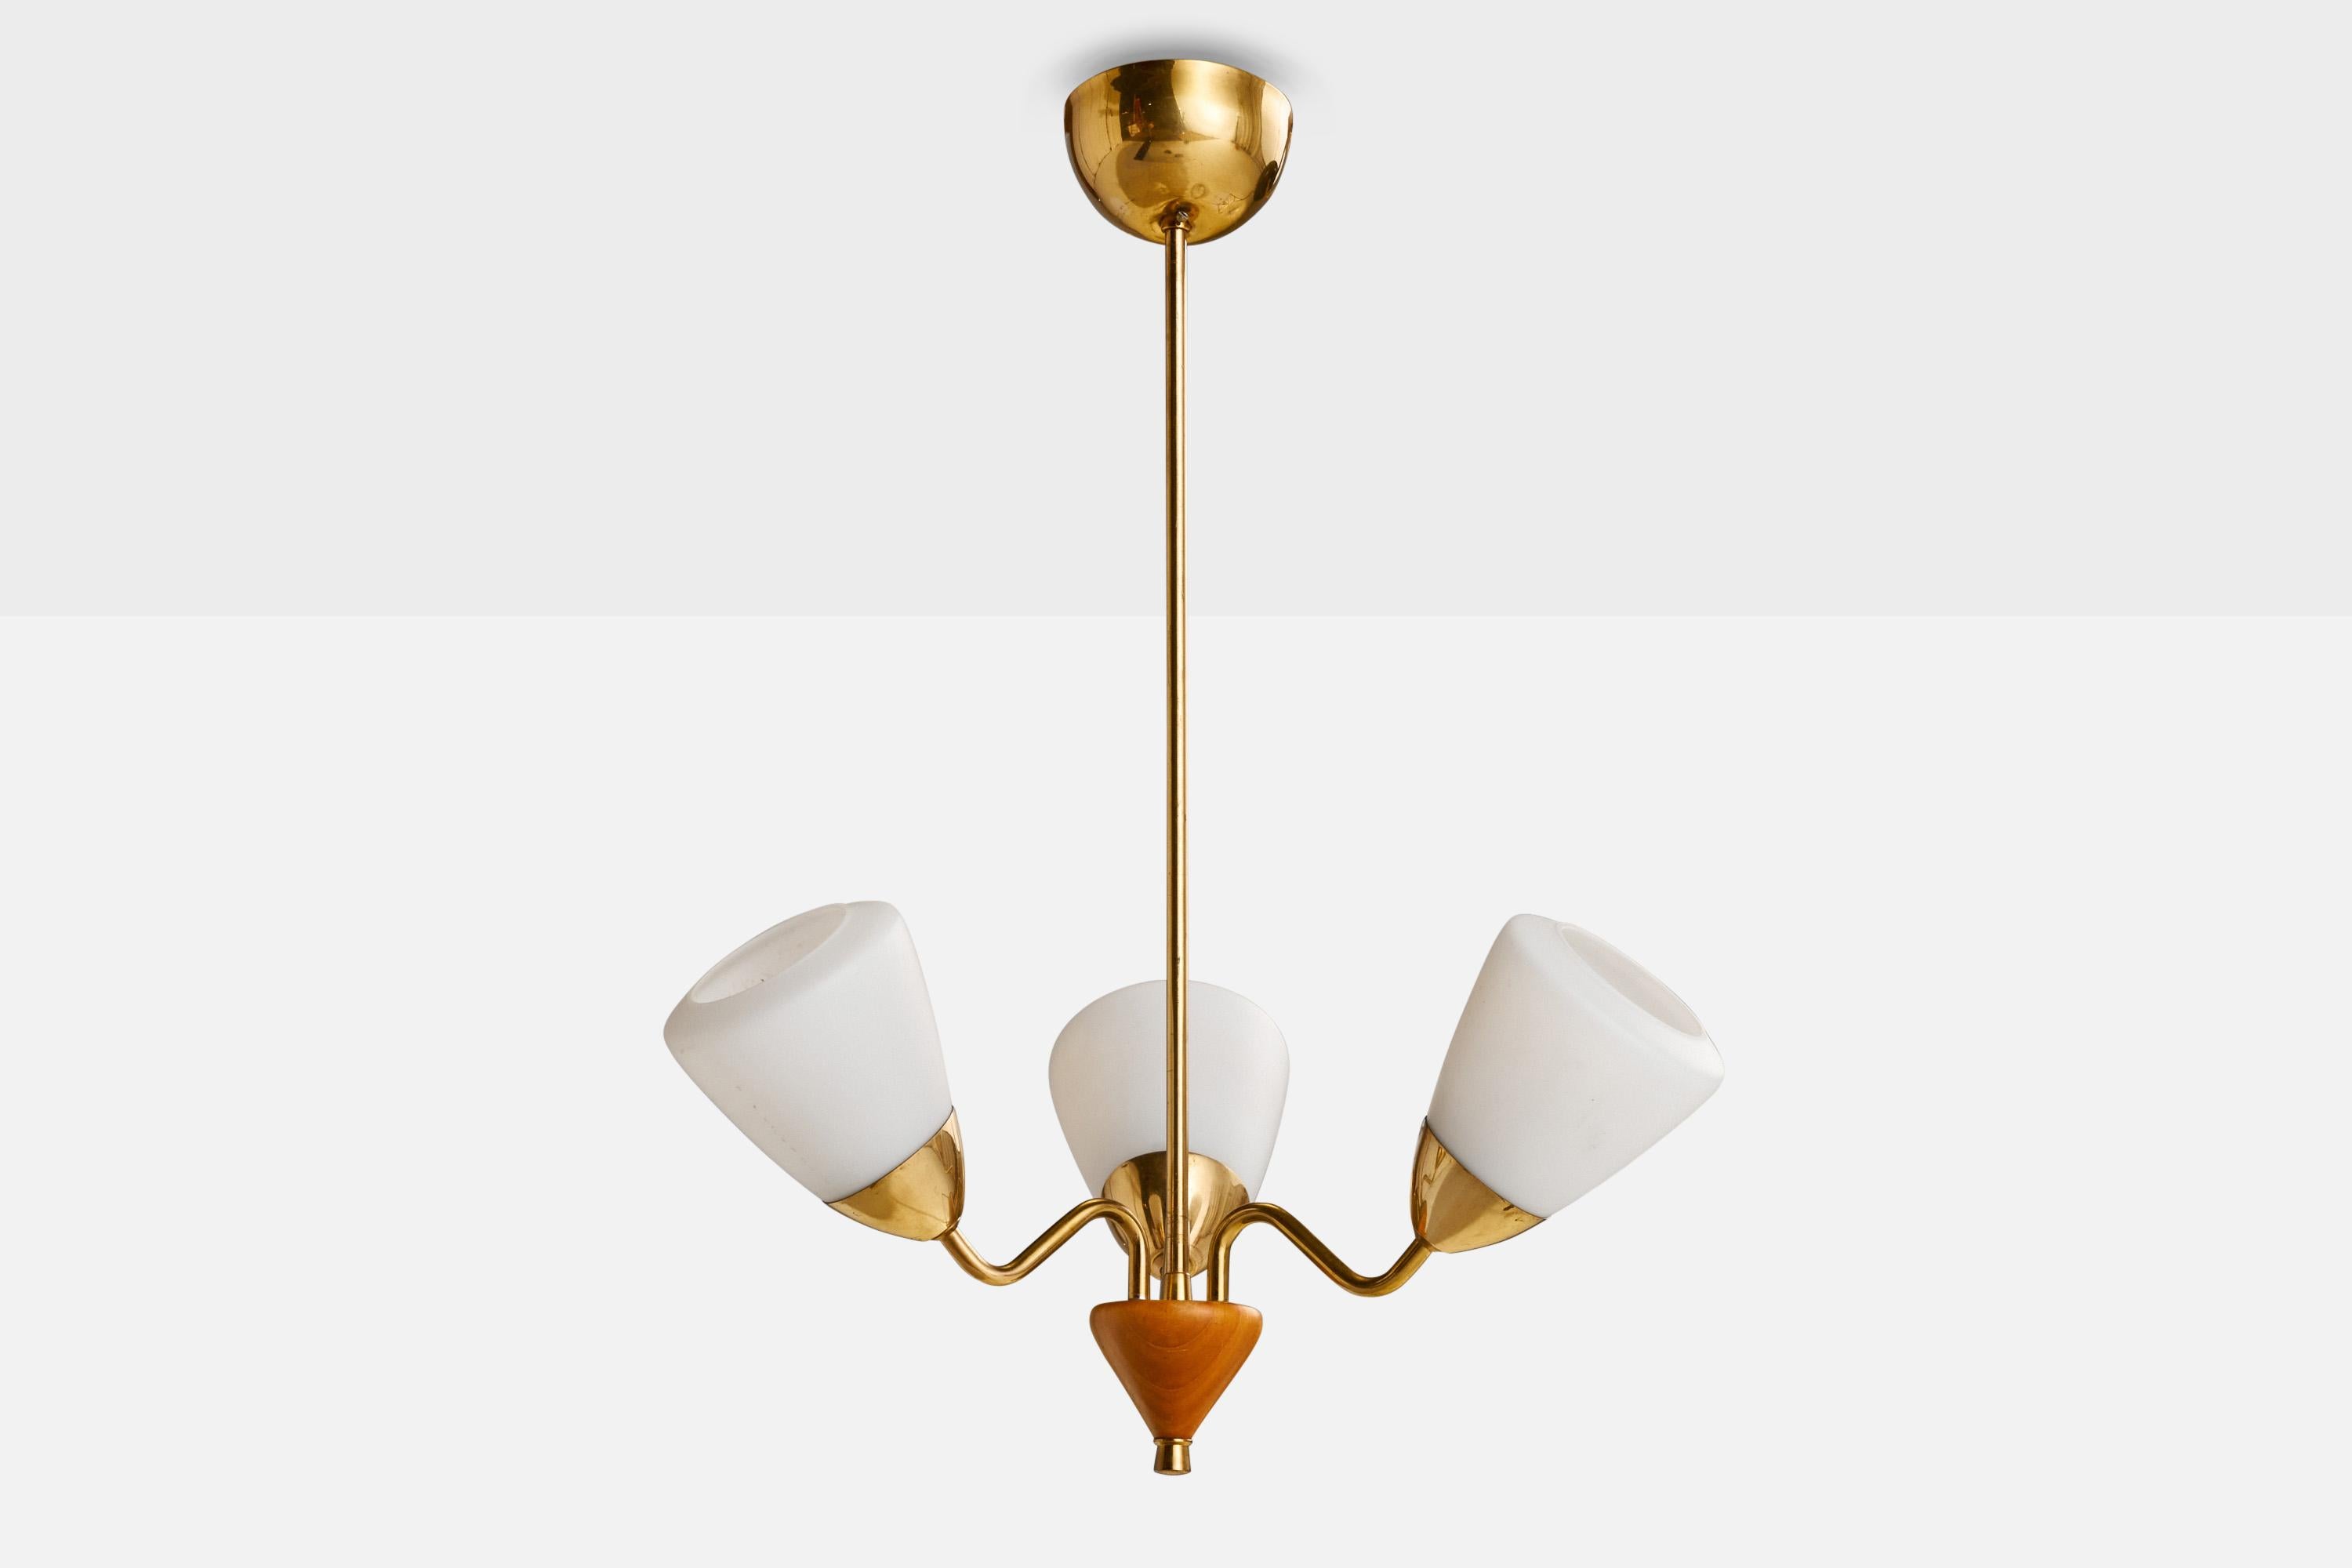 A brass, elm and opaline glass chandelier designed and produced in Sweden, 1940s

Dimensions of canopy (inches): 2.5” H x 3.75” Diameter
Socket takes standard E-26 bulbs. 3 sockets.There is no maximum wattage stated on the fixture. All lighting will